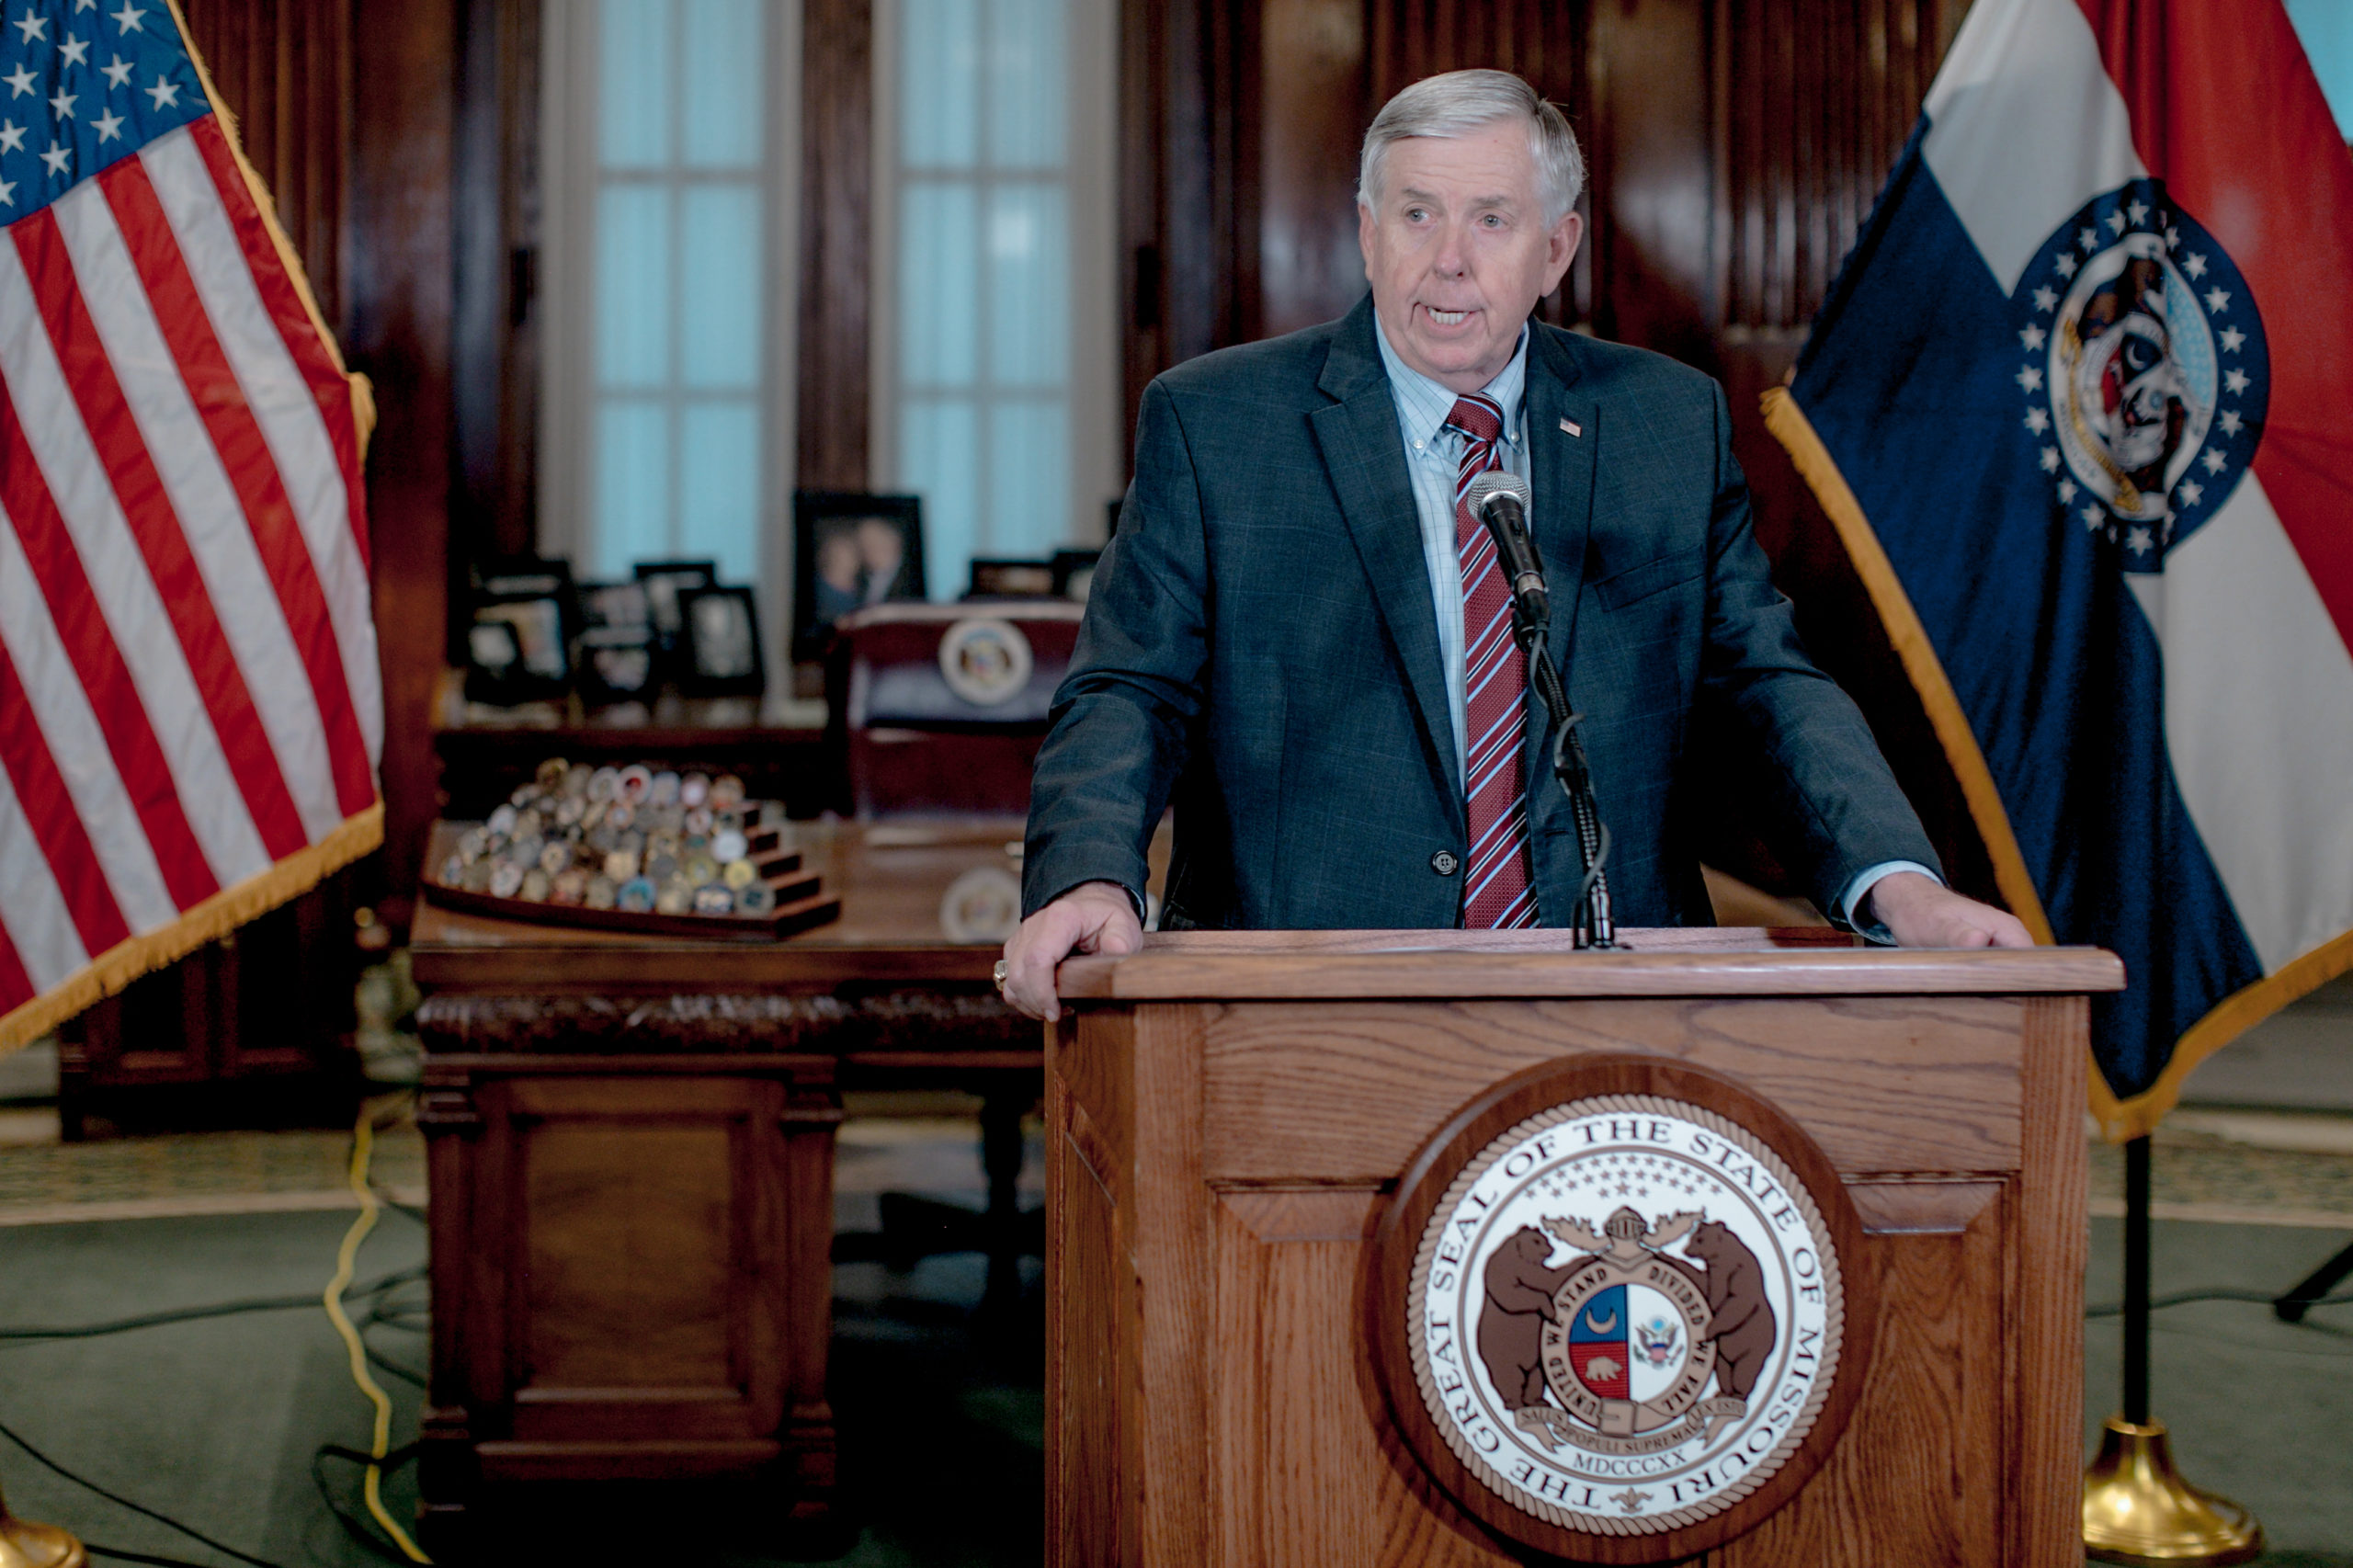 Gov. Mike Parson speaks during a press conference in 2019 in Jefferson City, Missouri. (Jacob Moscovitch/Getty Images)